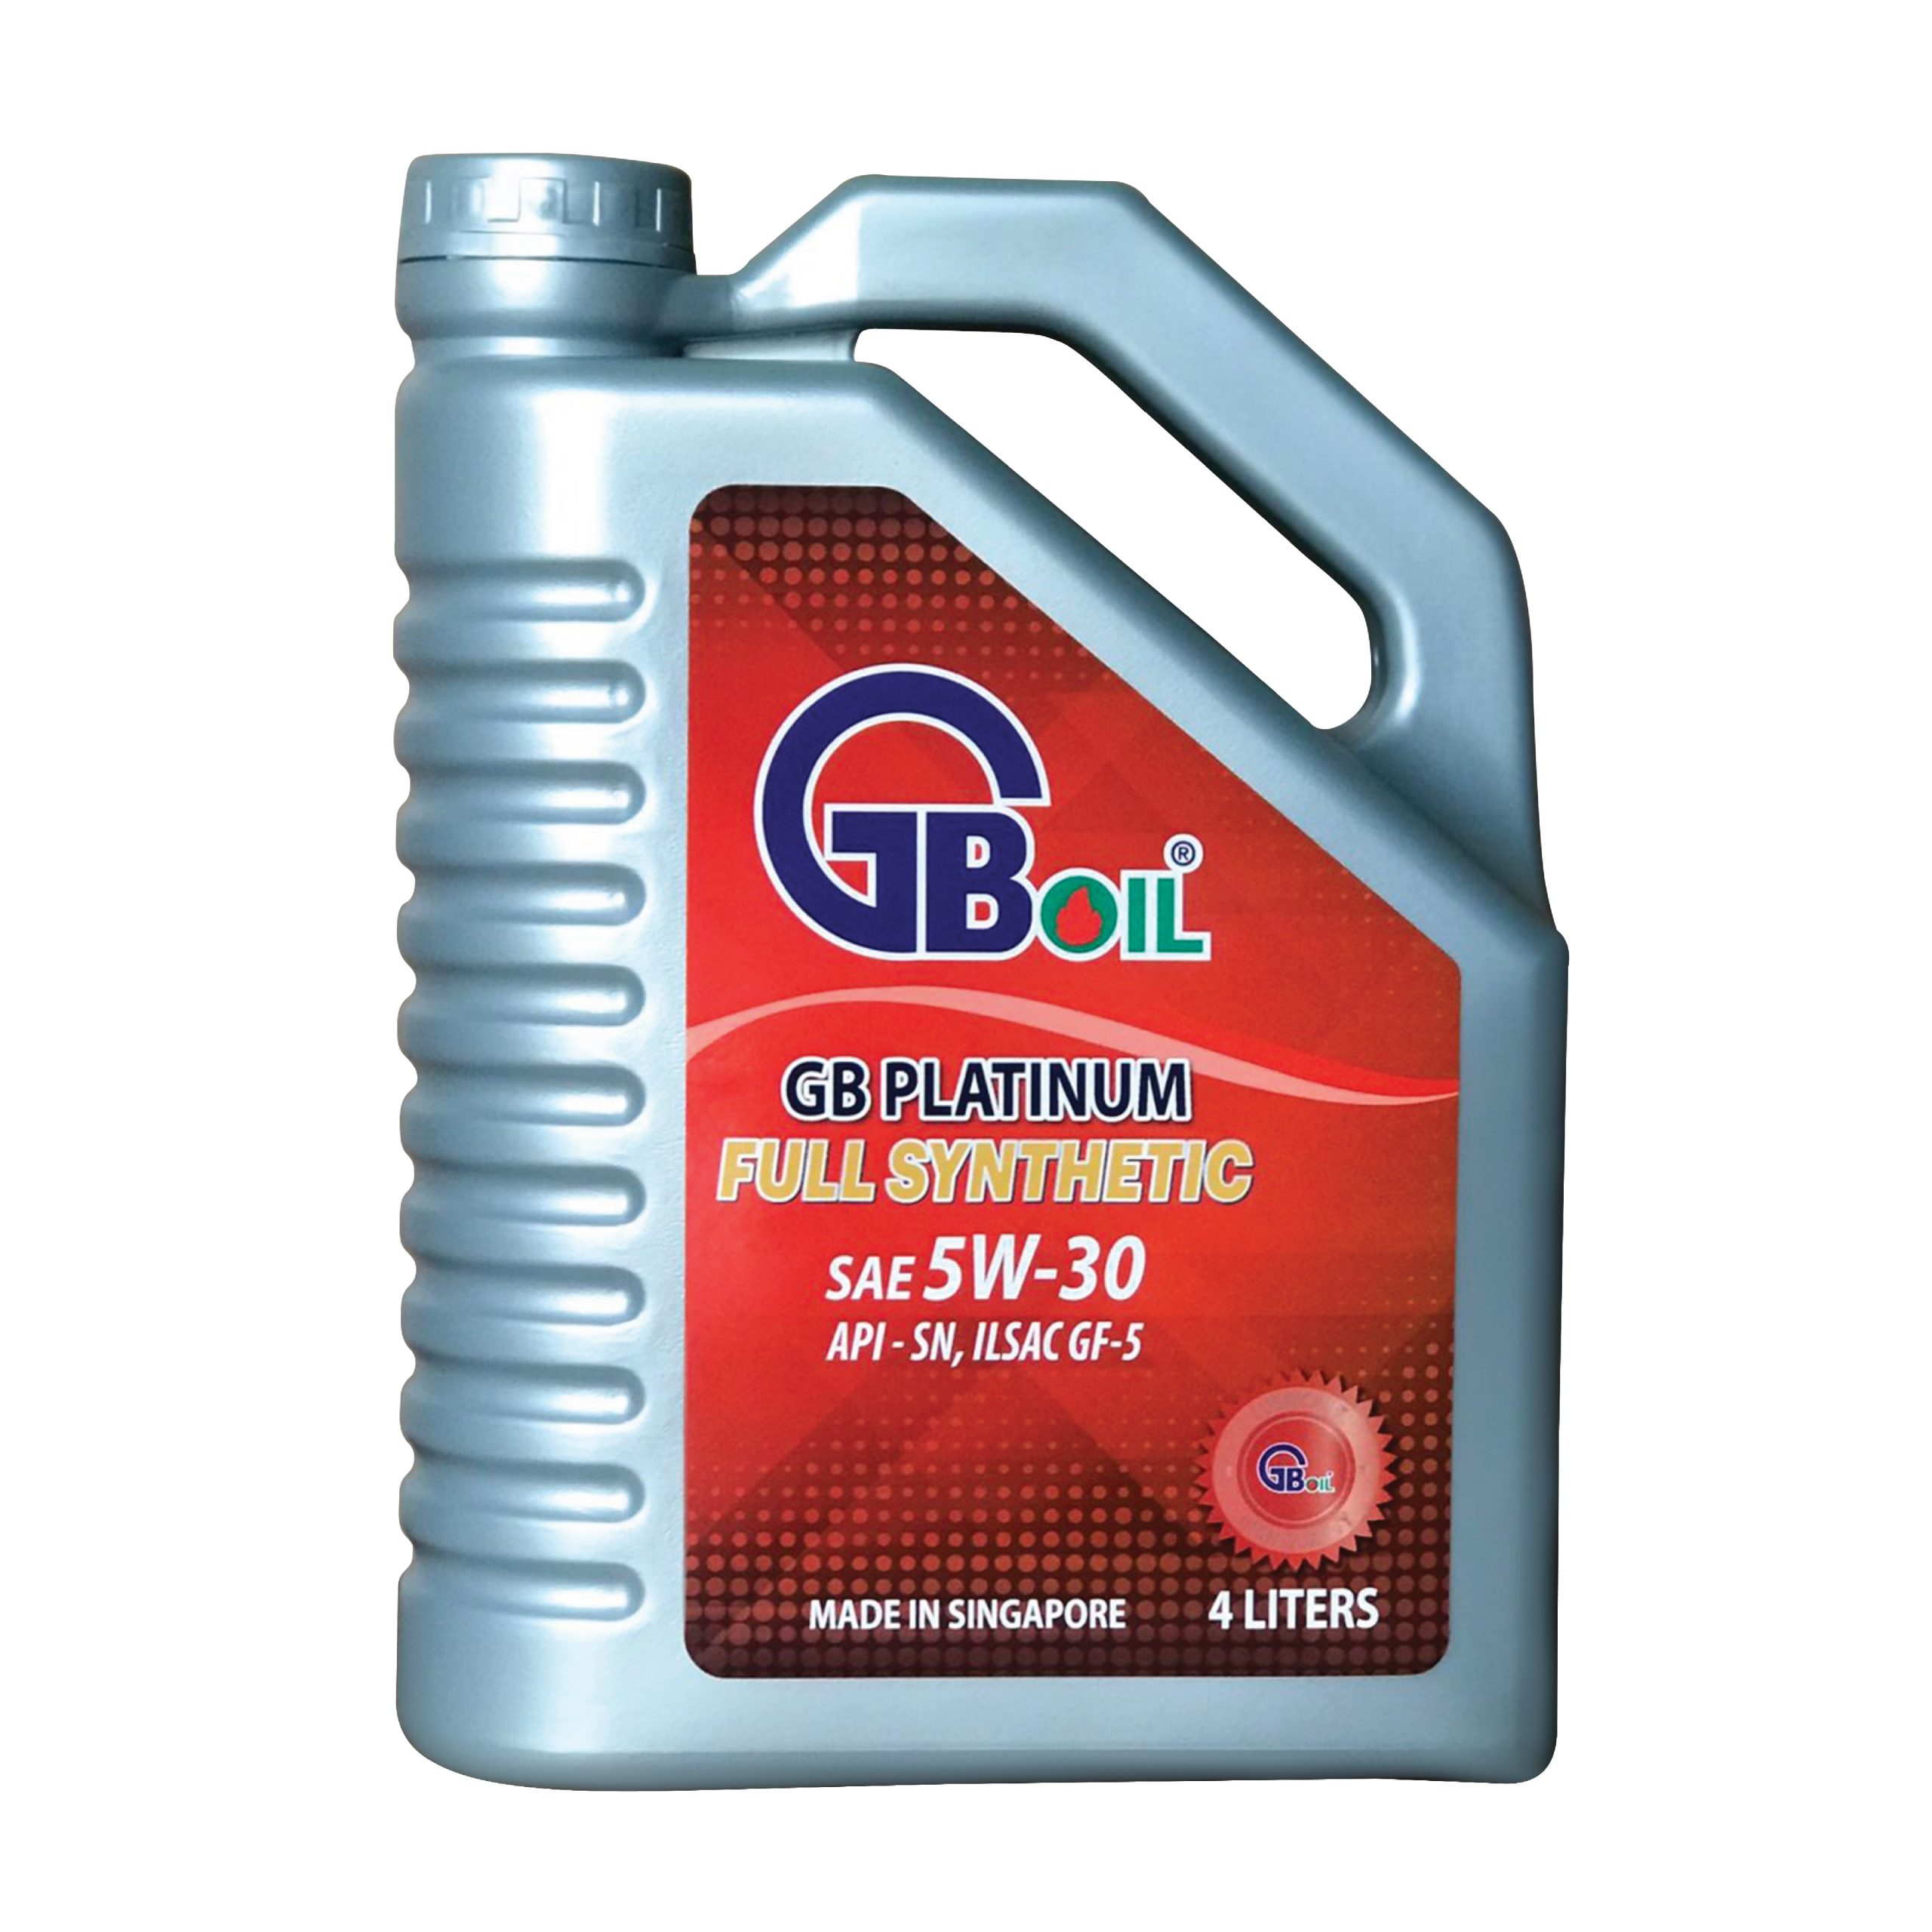 GB Platinum Full Synthetic 5W30 API-SN (Full Synthetic) – GBOIL